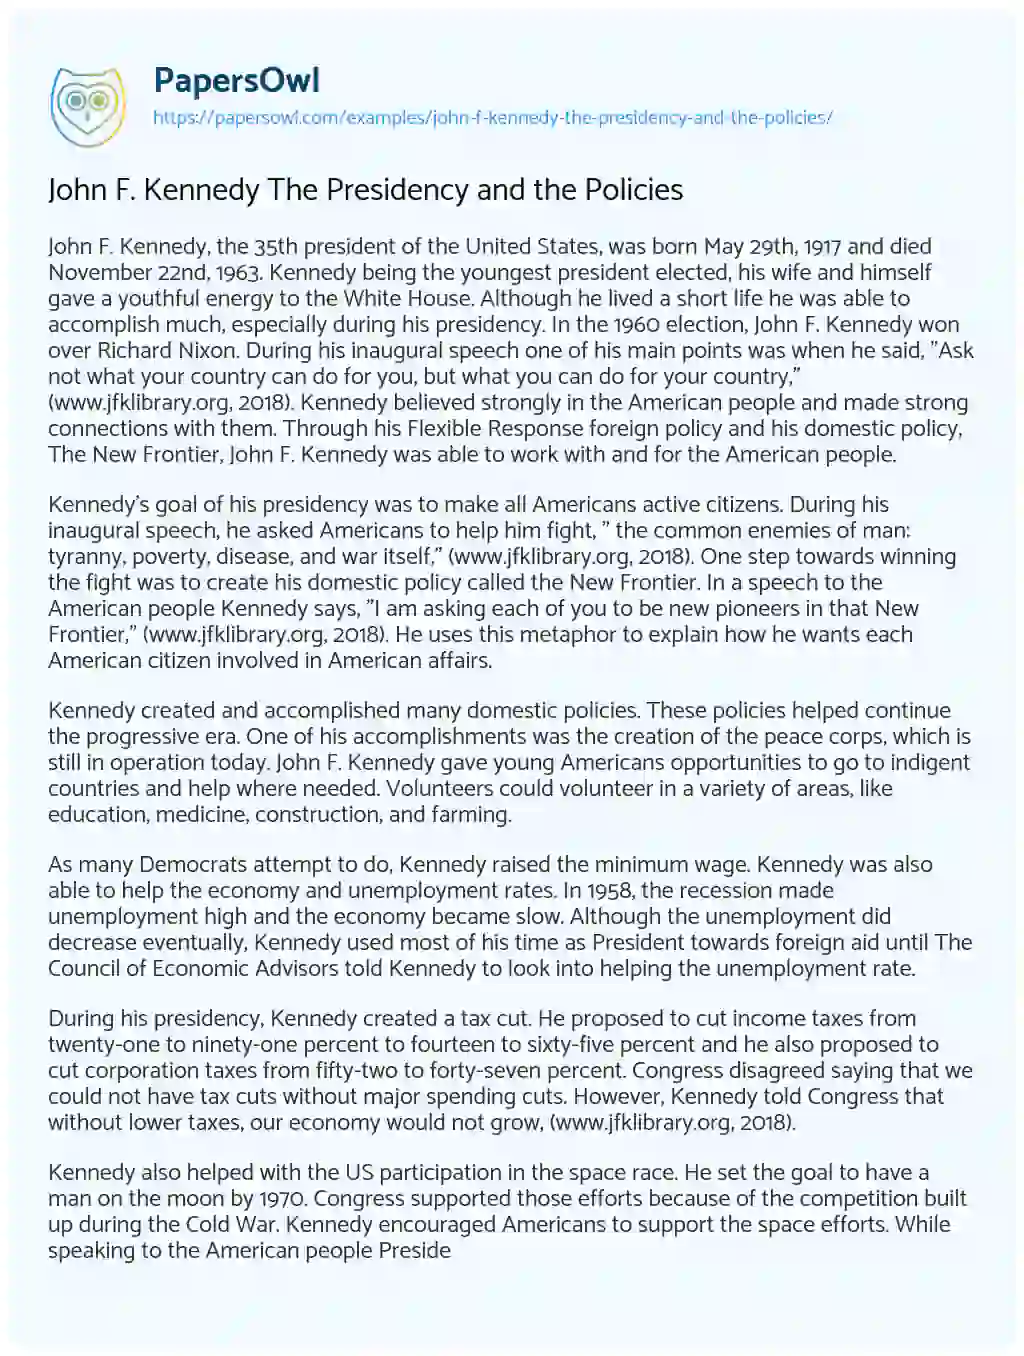 Essay on John F. Kennedy the Presidency and the Policies